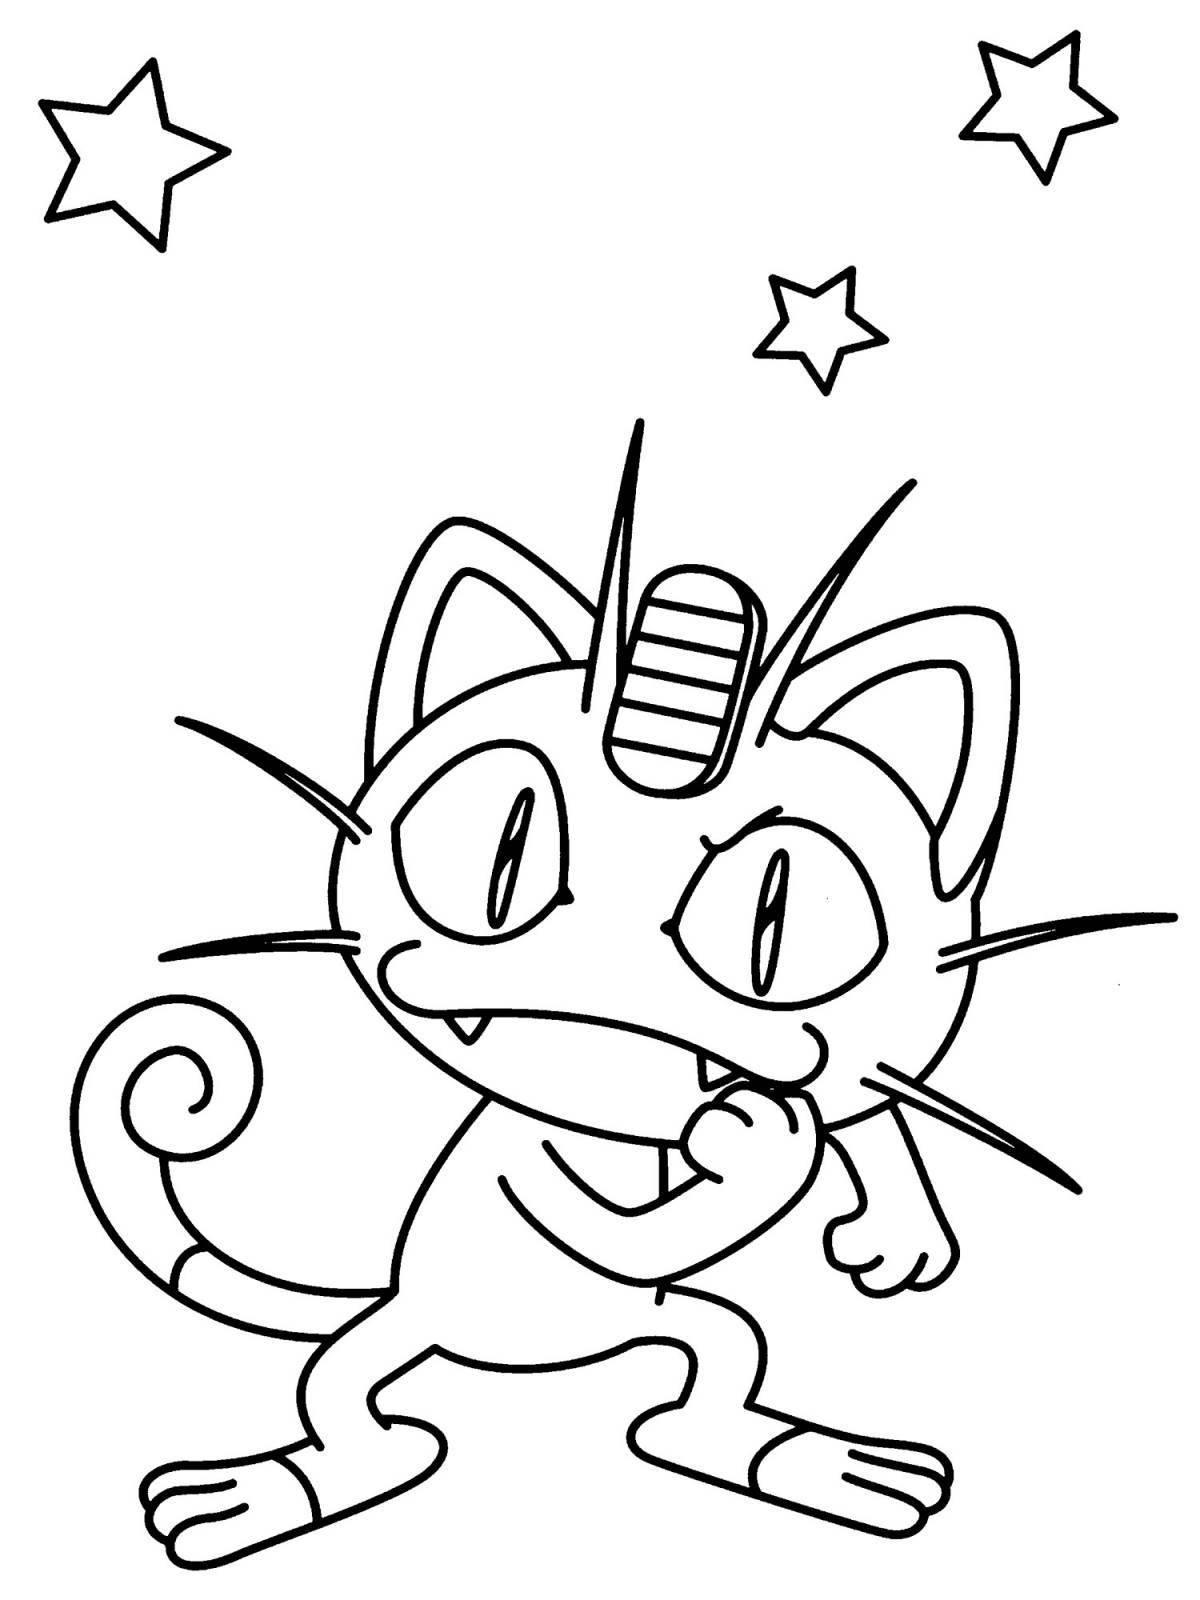 Coloring book smiling meowth